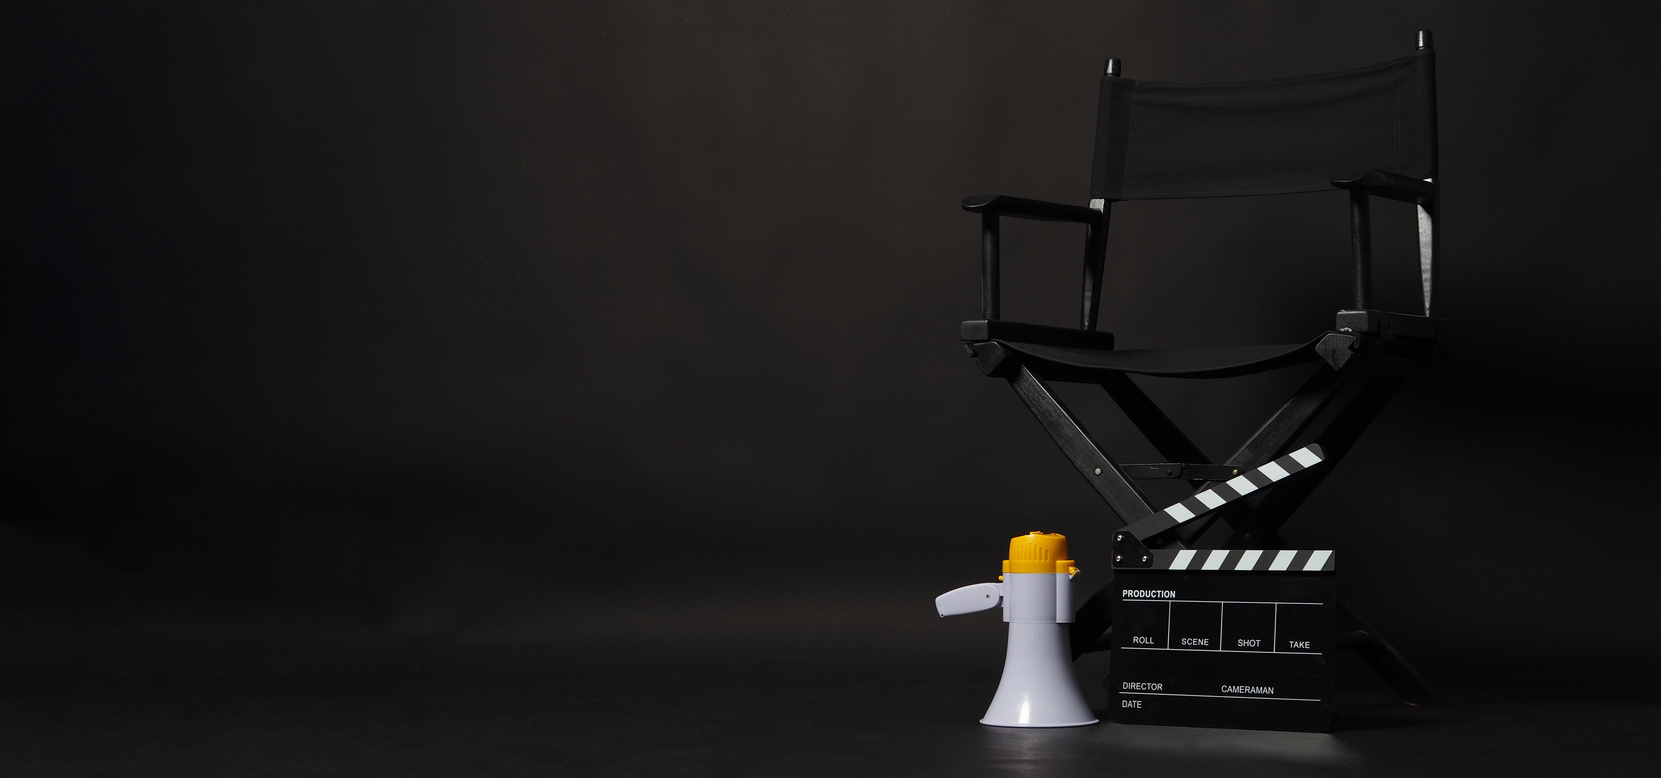 Director's Chair, Clapperboard, and Megaphone